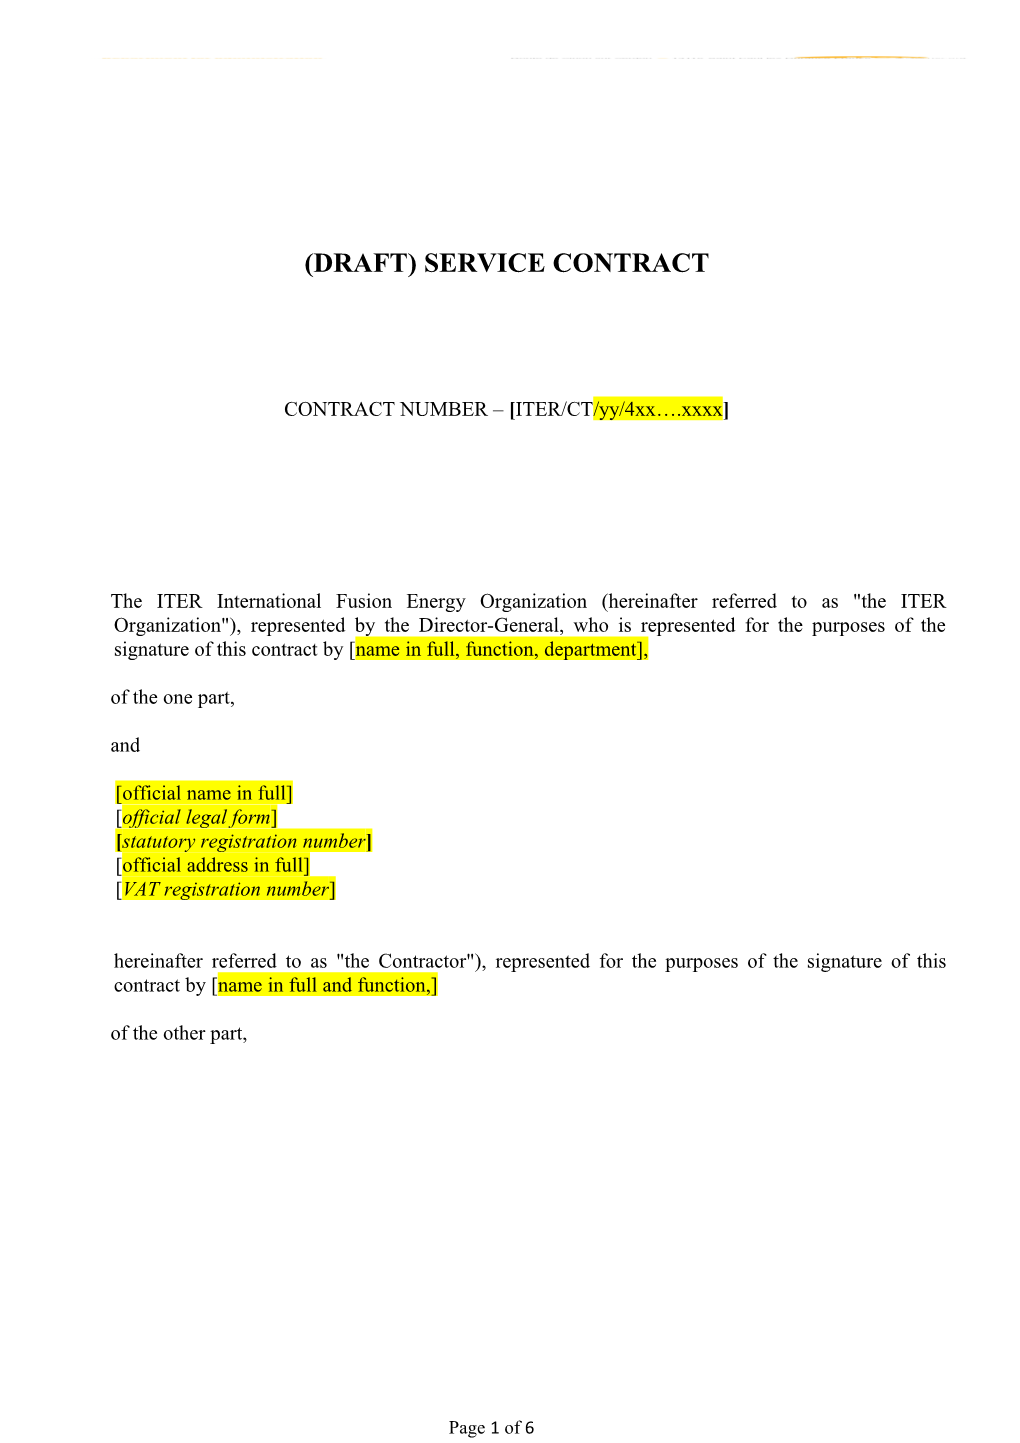 (Draft) Service Contract